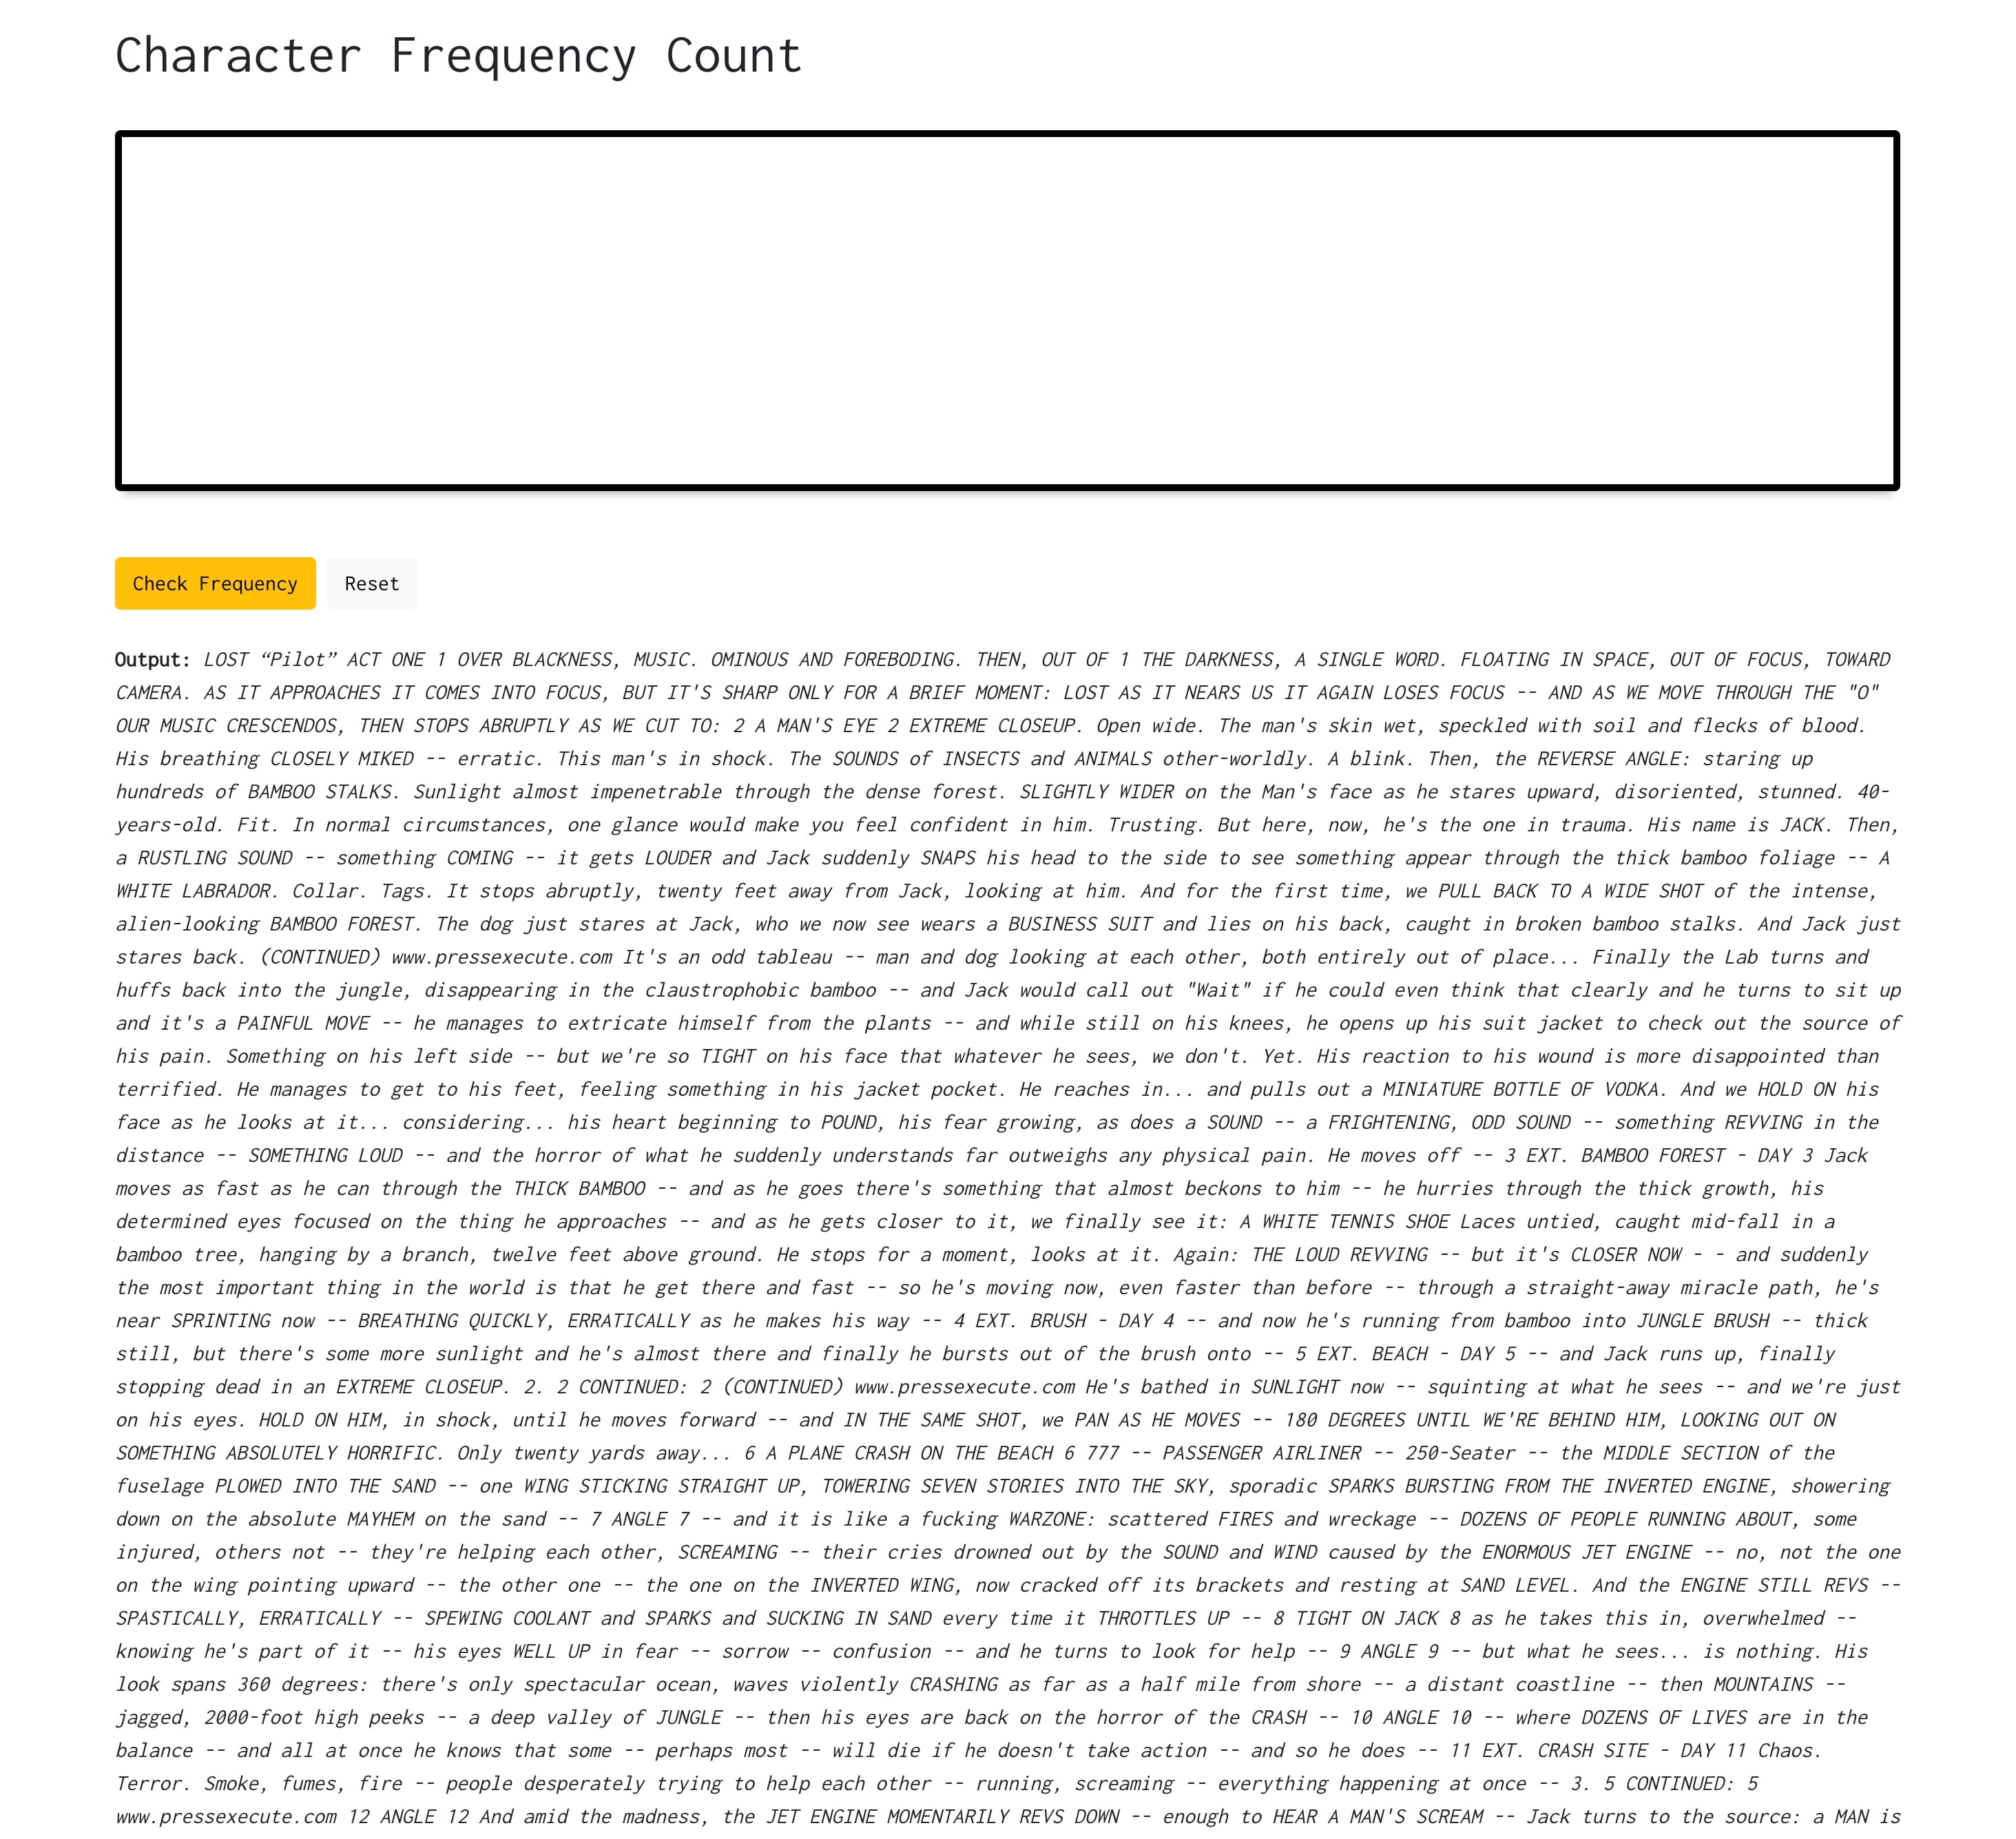 character frequency application